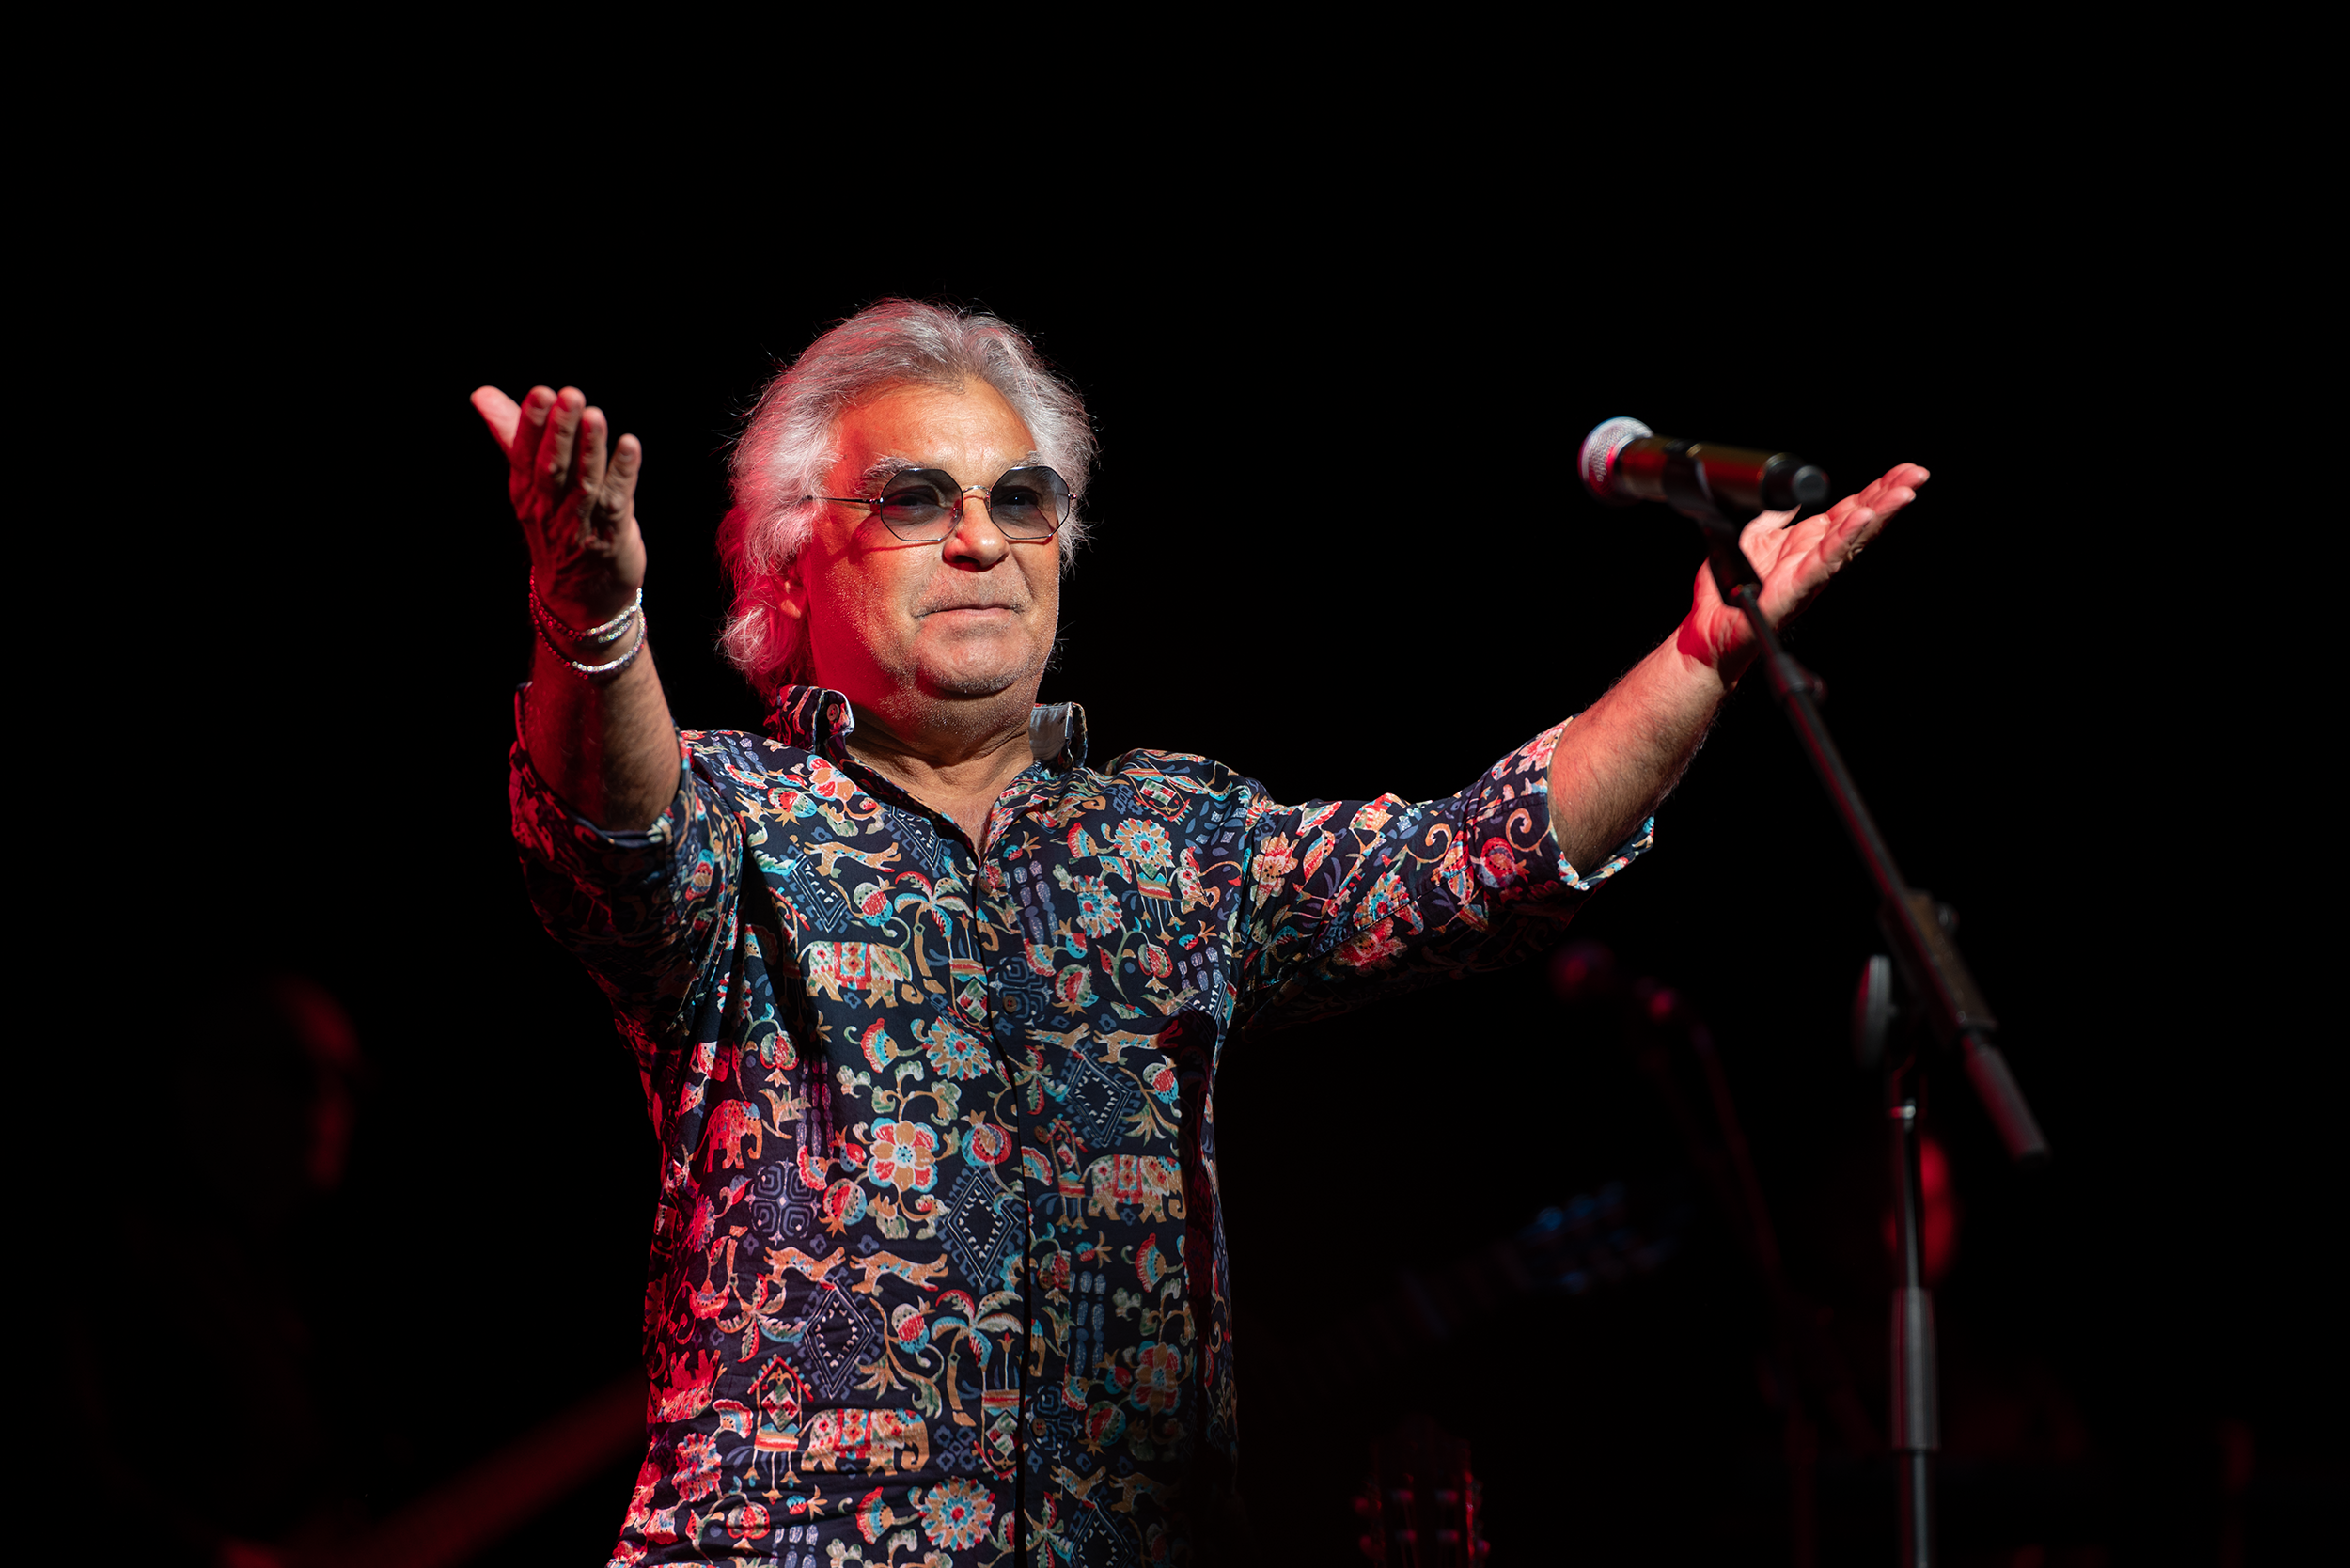 Nicolas Reyes, founder of the Gipsy Kings: “Many gypsies were deported during the Shoah, and I think we don't talk about it enough. »